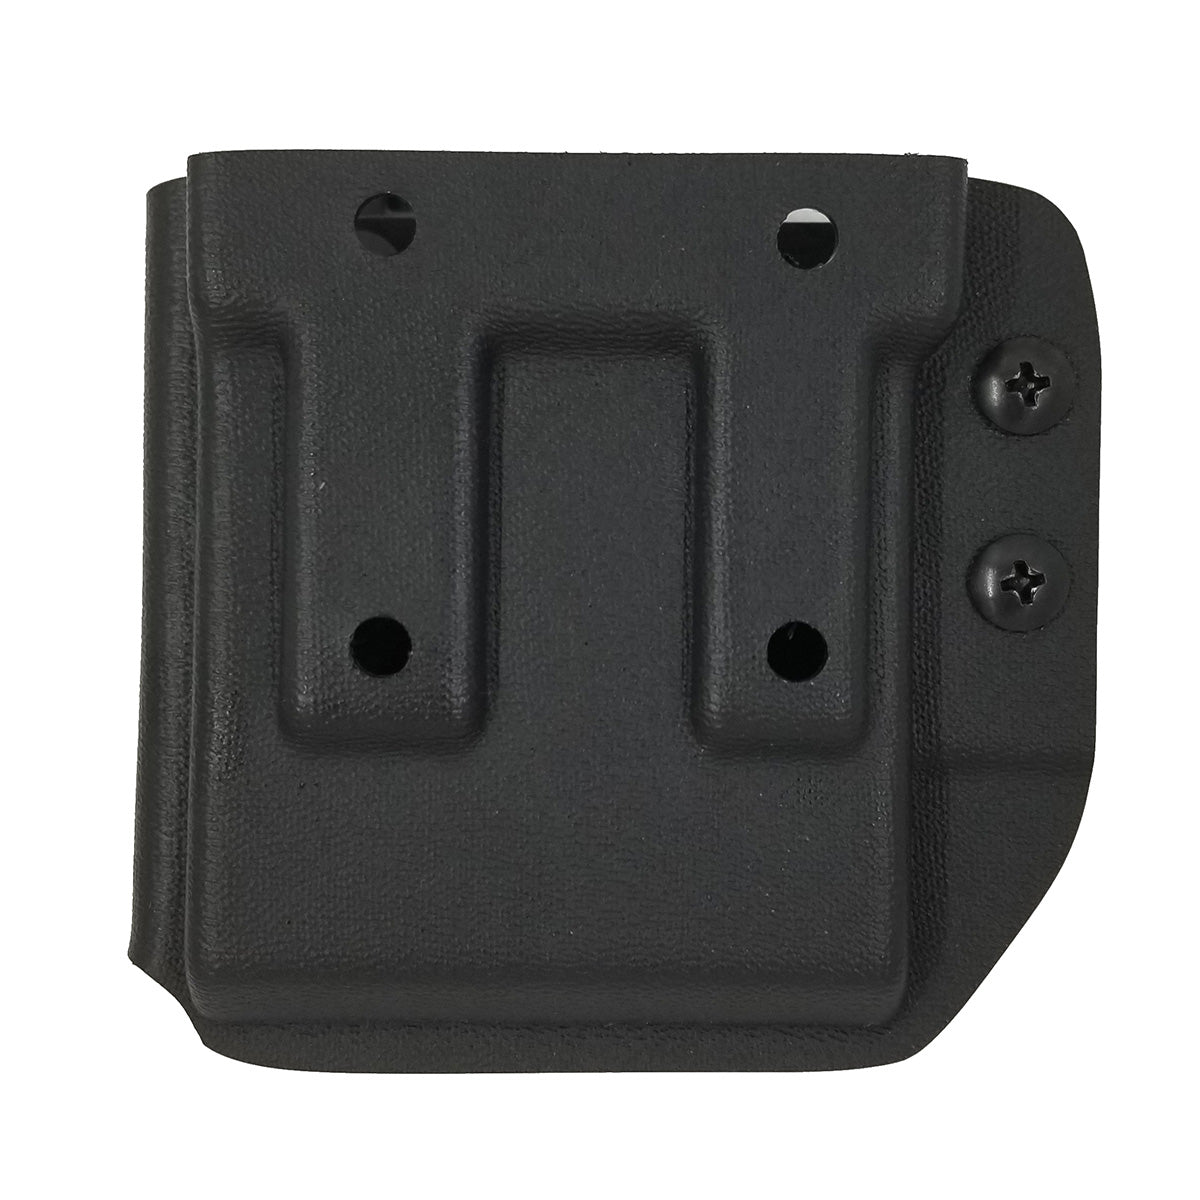 AR15 magazine pouch designed to fit all popular AR Magazines. Tek-Lok Belt attachment fits belts up to 2" wide. Magazine Retention Device provides retention adjustability with an 1/8" Allen wrench. Molded with .080" thick thermoplastic for durability.